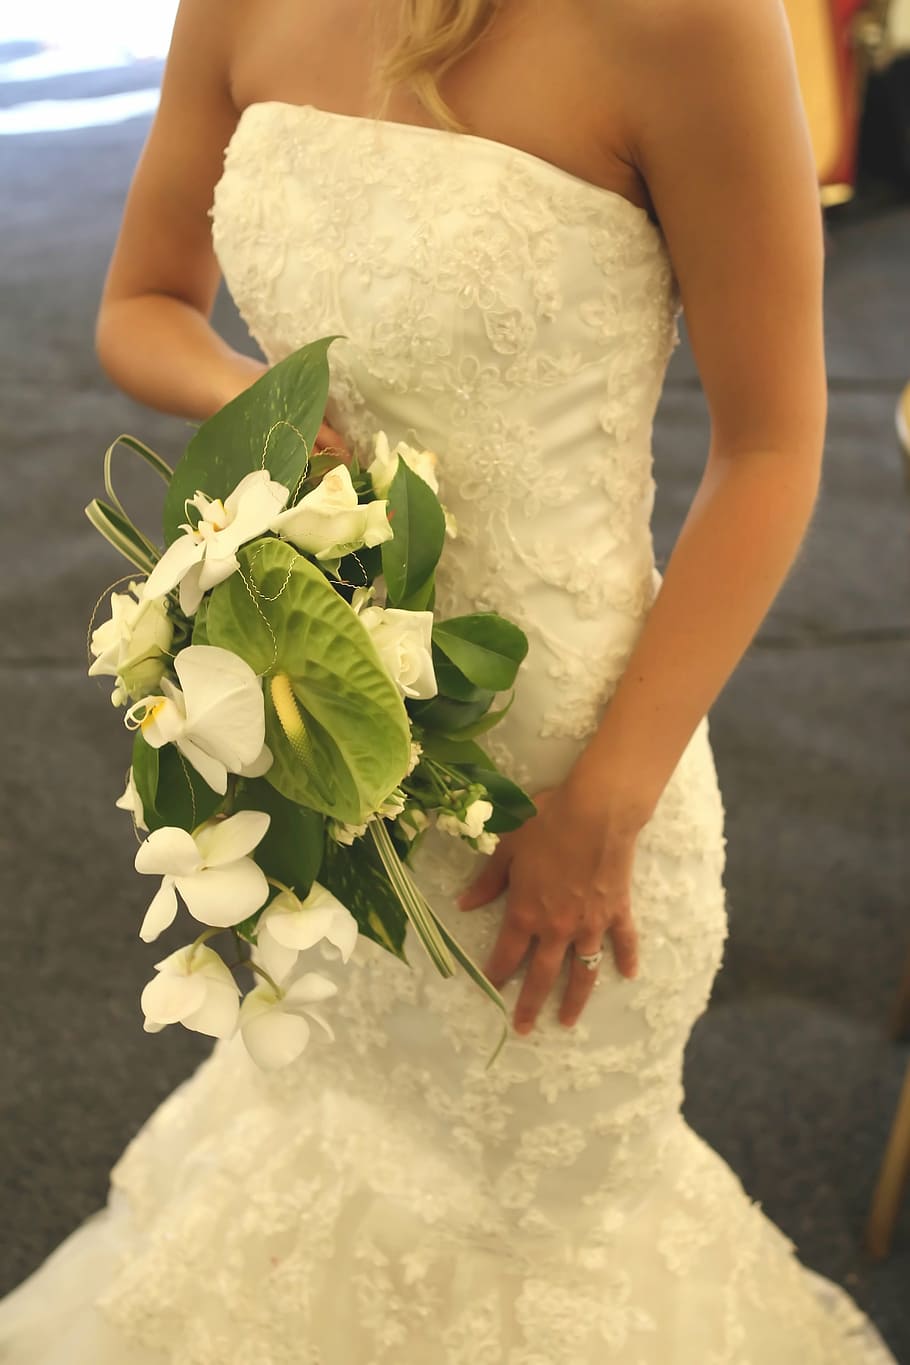 woman, wearing, white, lace wedding gown, holding, bouquet, affair, anniversary, attractive, banquet